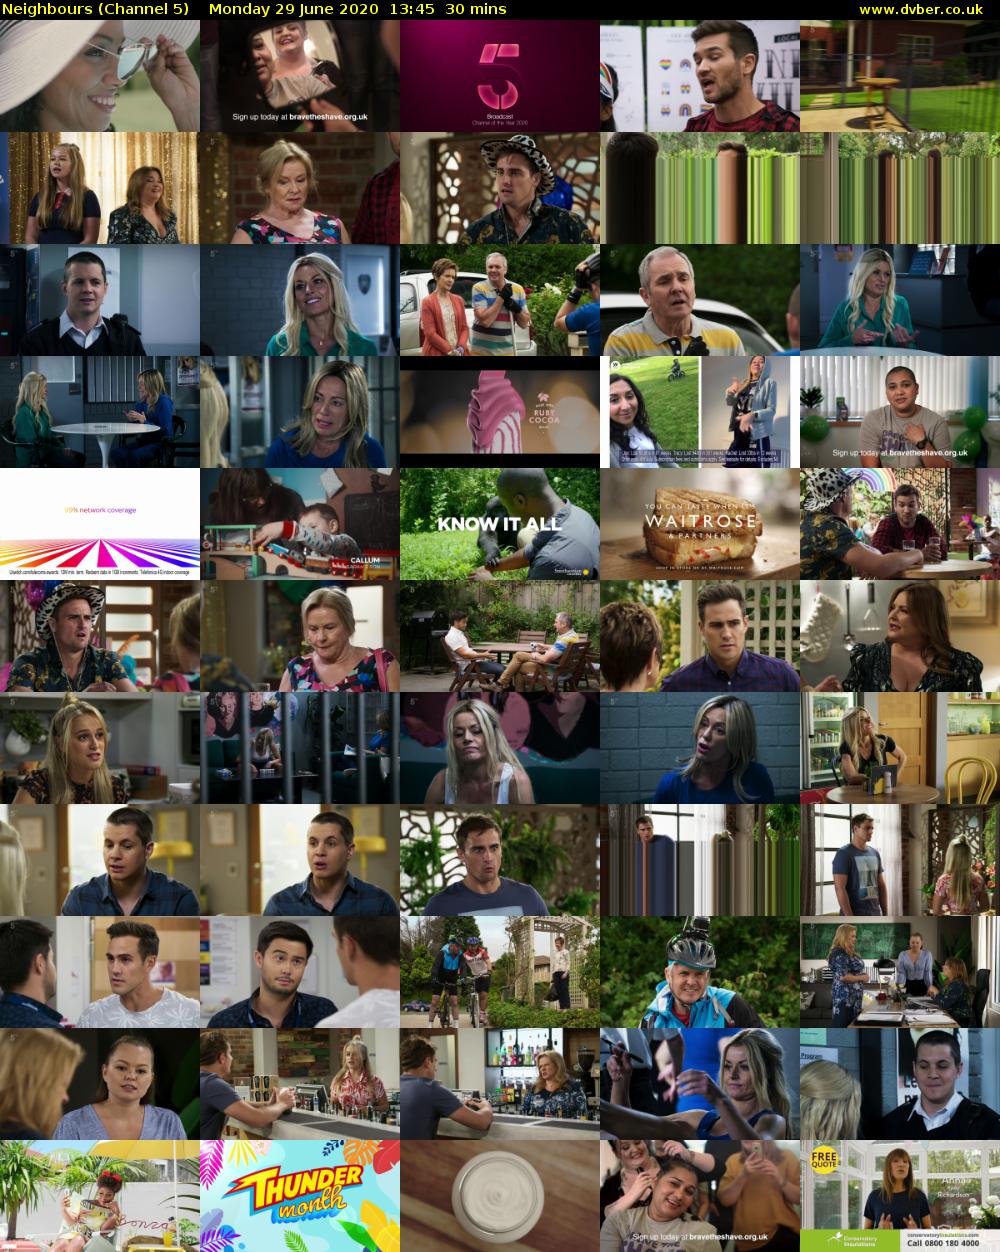 Neighbours (Channel 5) Monday 29 June 2020 13:45 - 14:15